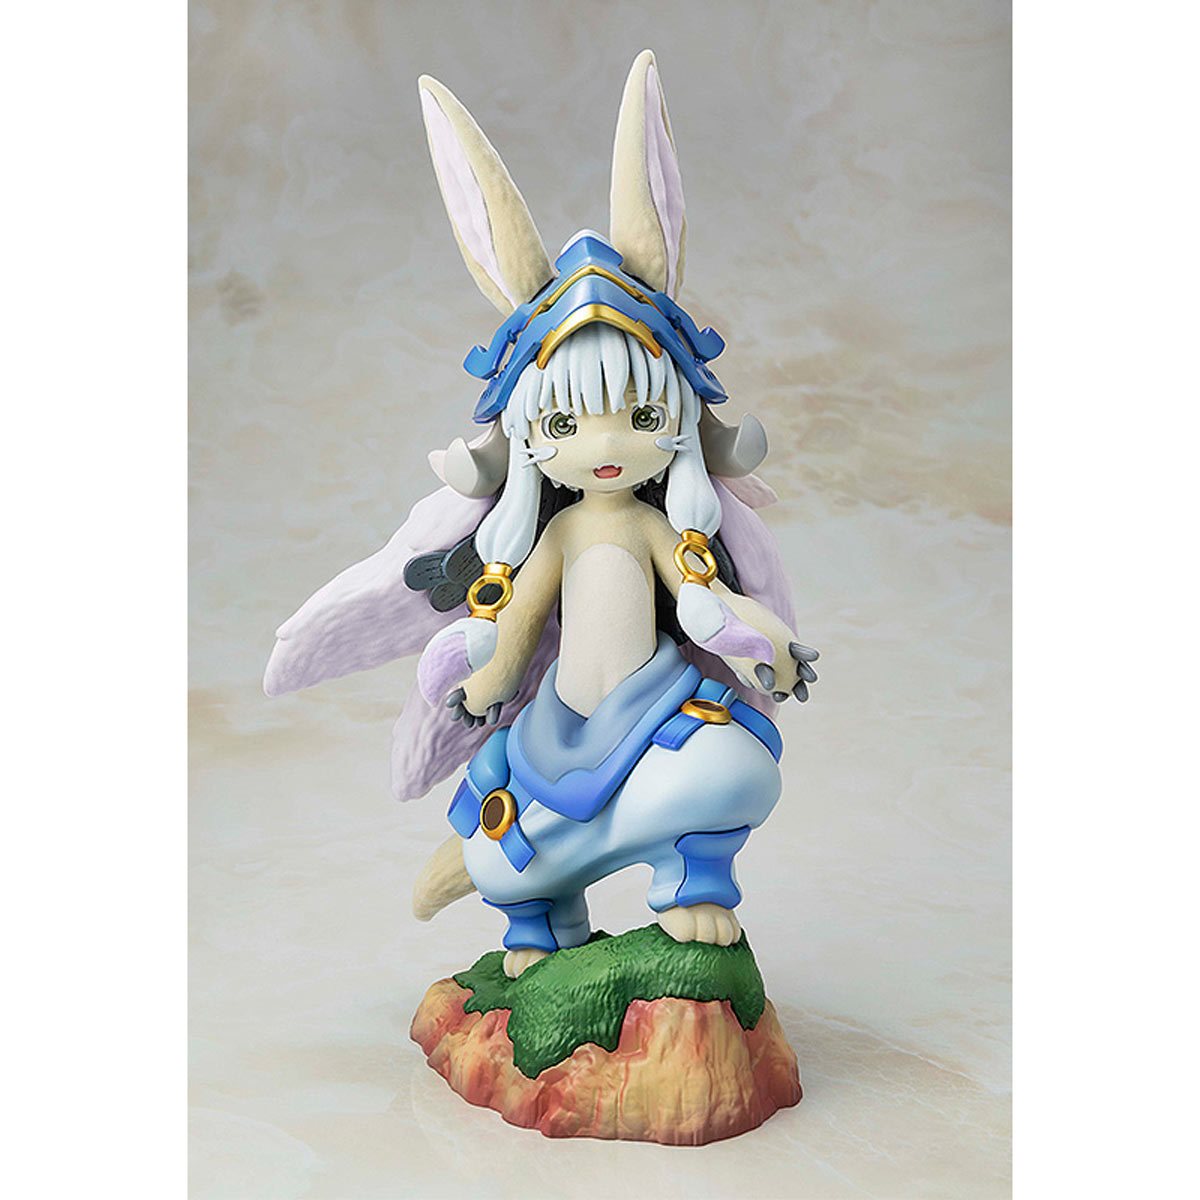 Made in Abyss: The Golden City of the Scorching Sun - Nanachi 1/7th Scale Figure Kadokawa (Special Set)